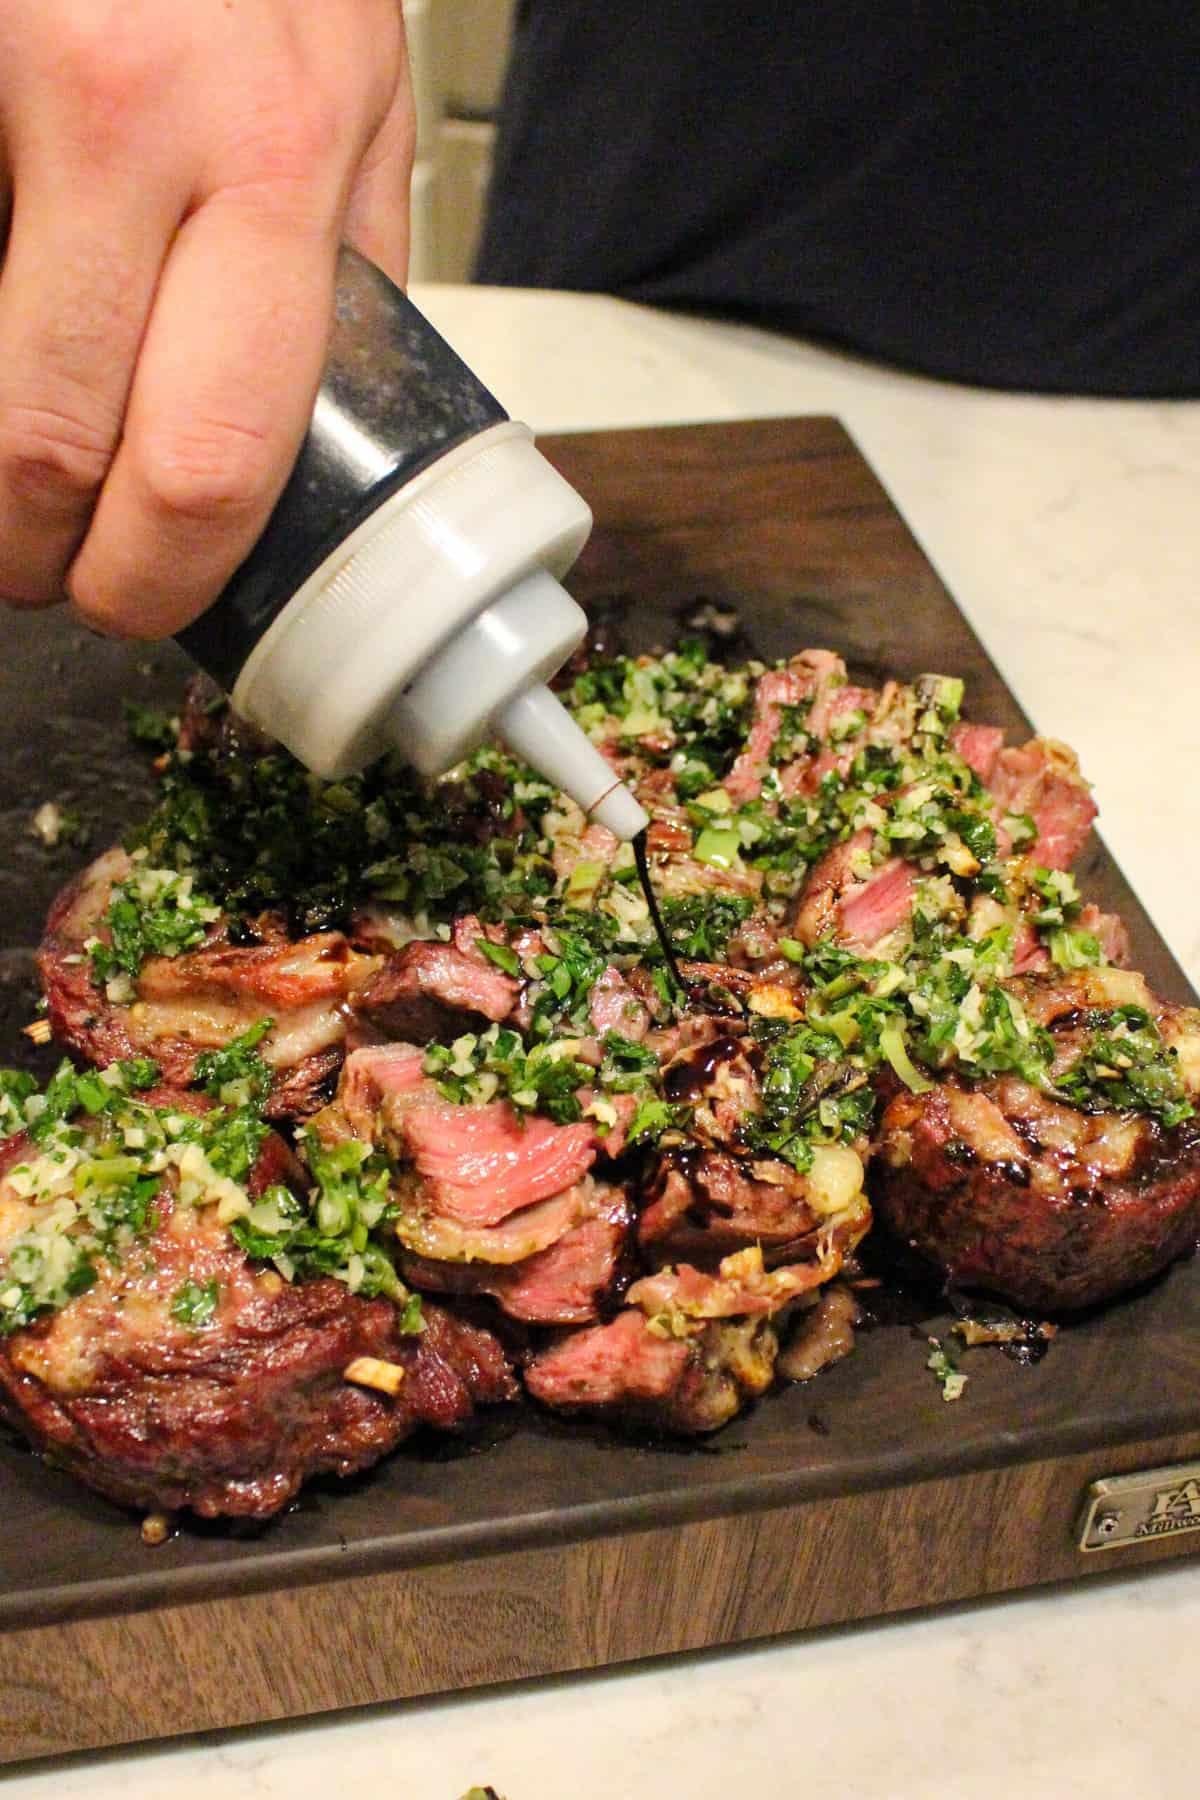 balsamic vinegar being drizzled over grilled steak pinwheels with charred scallion gremolata